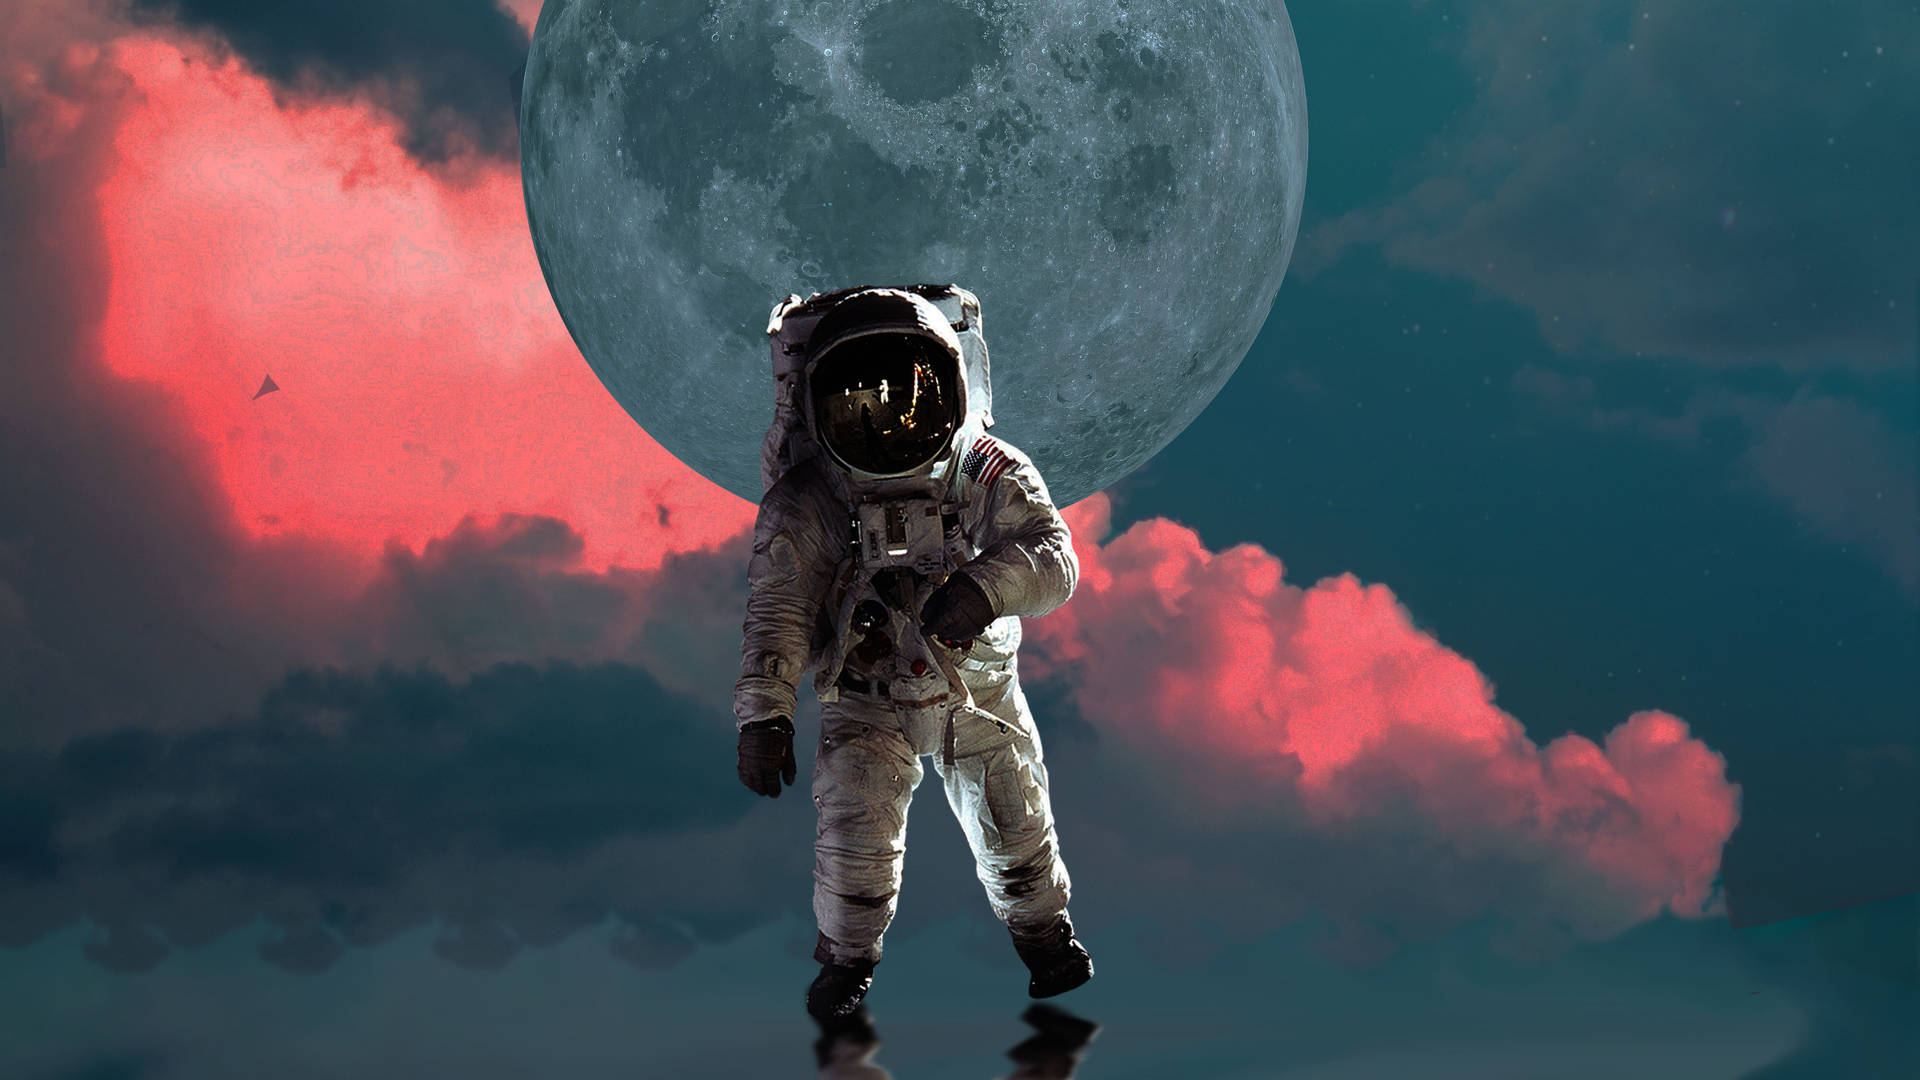 Nasa Astronaut In Clouds And Moon Wallpaper